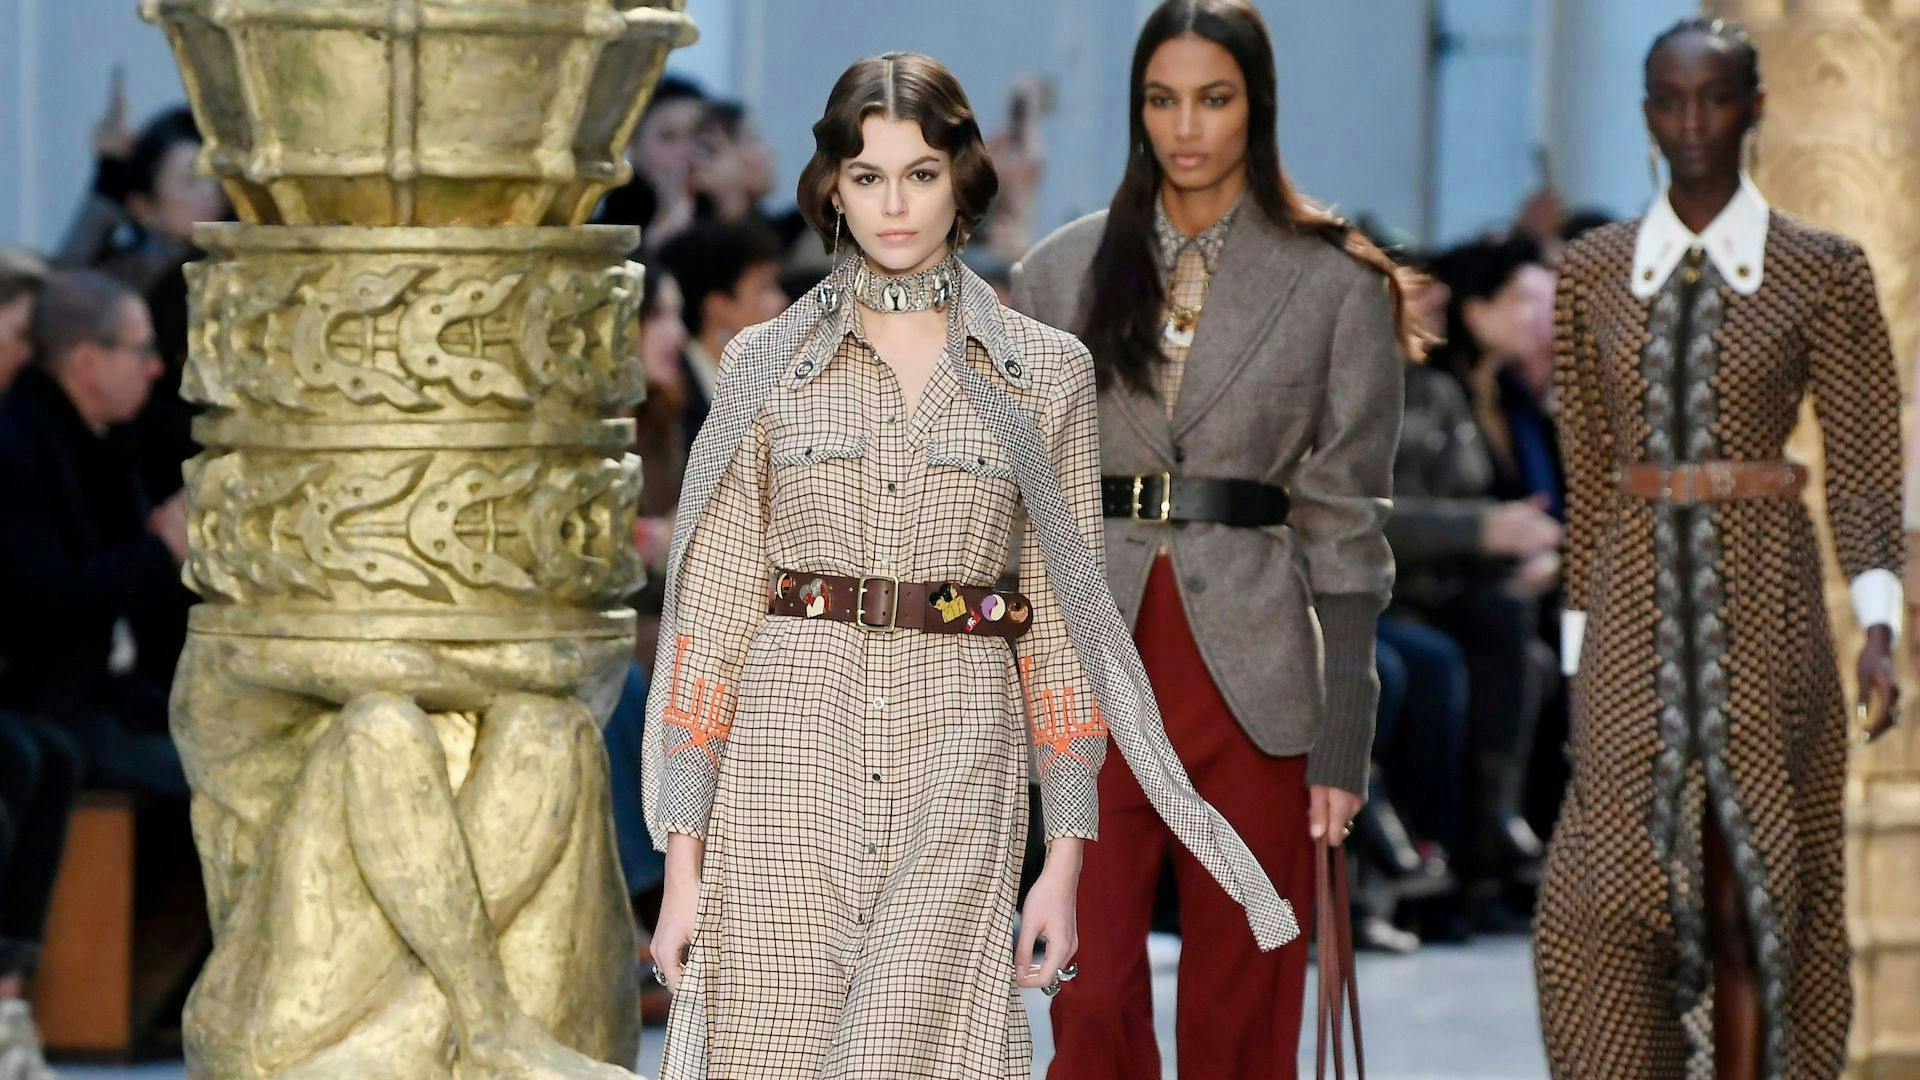 chloe show runway fall winter 2020 paris fashion week france 27 feb kaia gerber models catwalk pfw aw20 fw20 autumn model modelling female with others personality 87605451 person human premiere clothing apparel